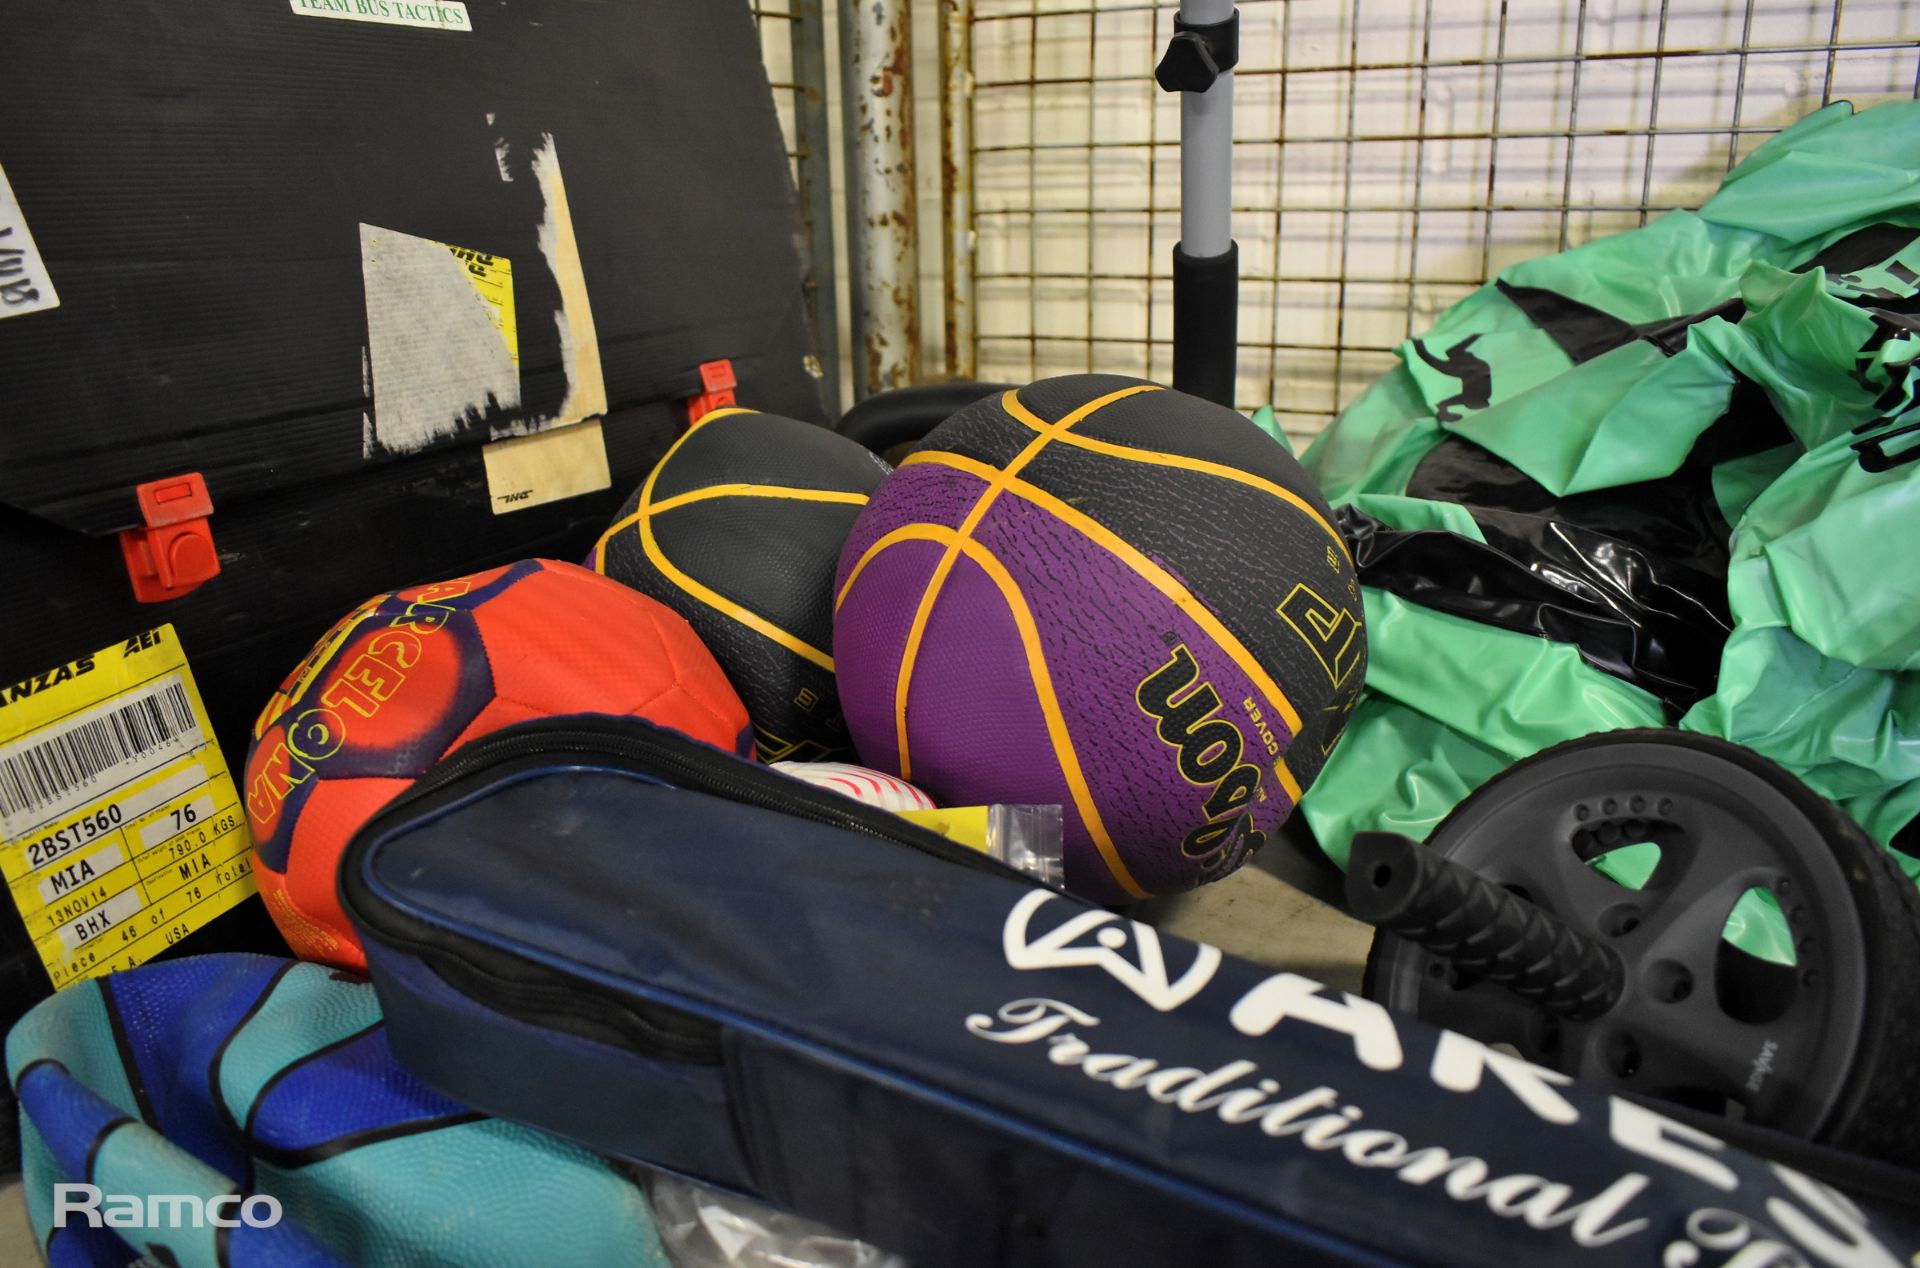 Sport exercise equipment - Tennis/badminton racket, dumbell, rounders set, various balls, inflatable - Image 2 of 7